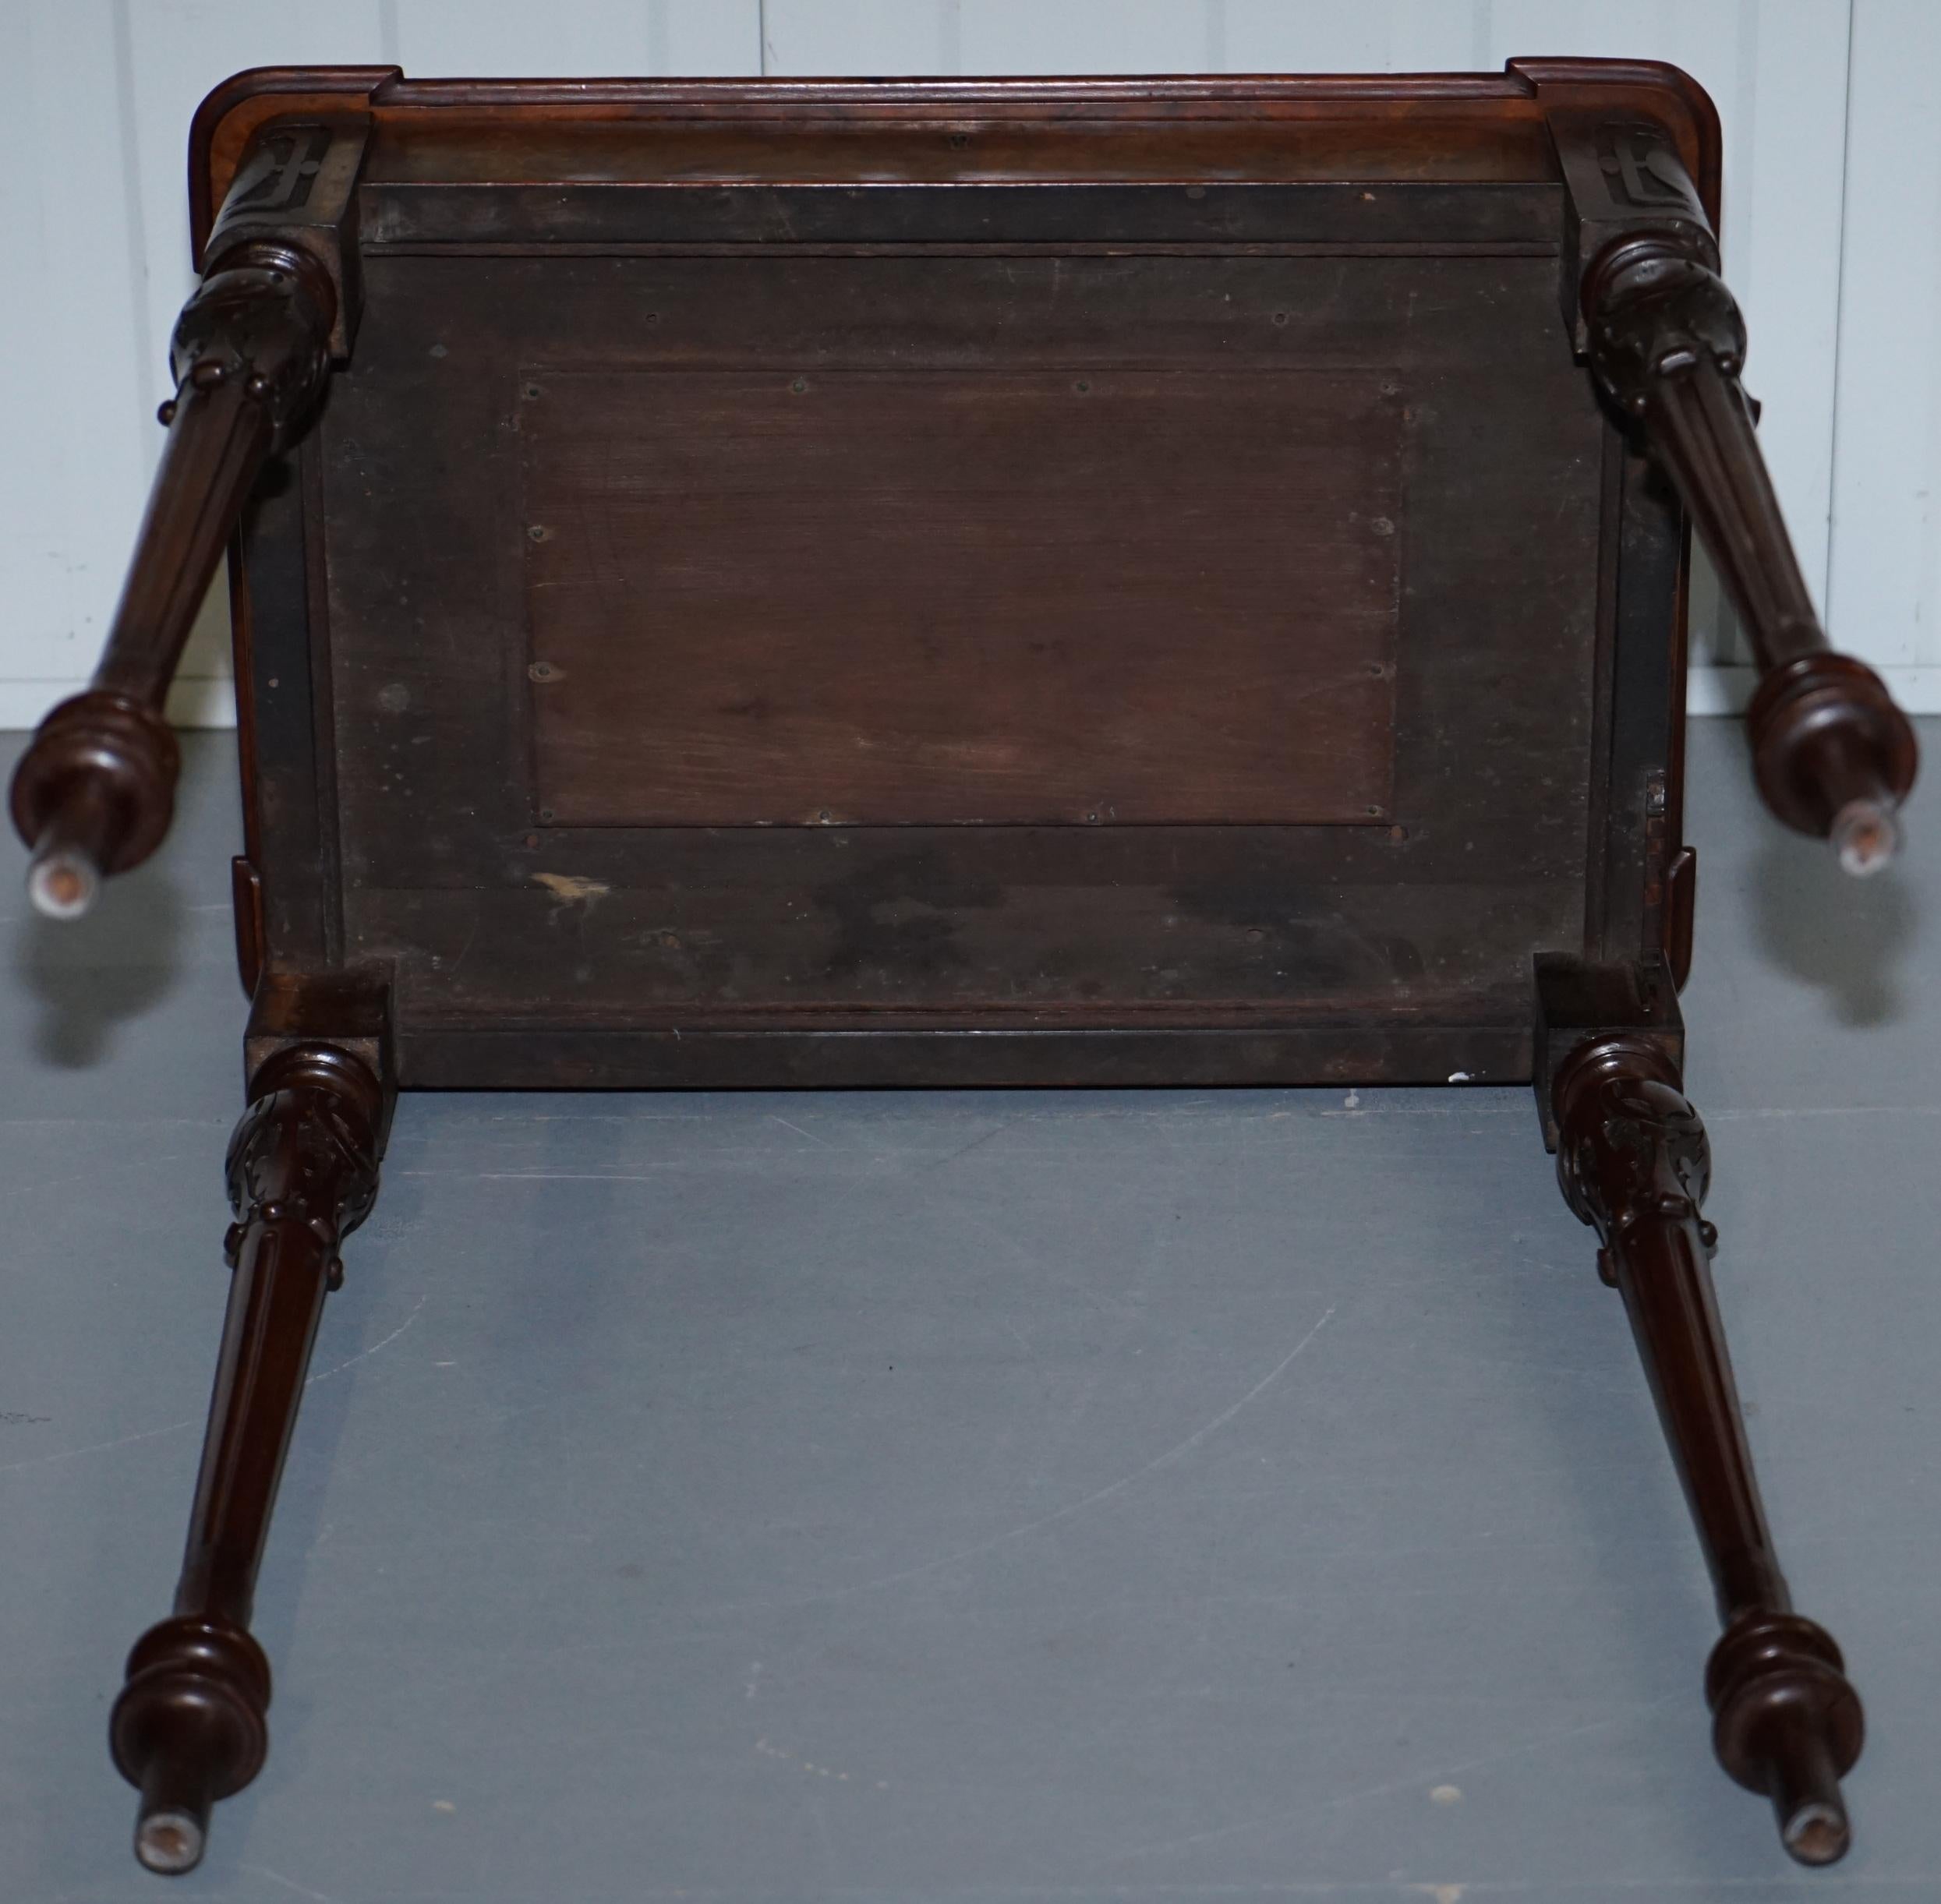 Stunning Rare Early Victorian Burr Walnut Games Table Lift Top Fret Work Carved 15